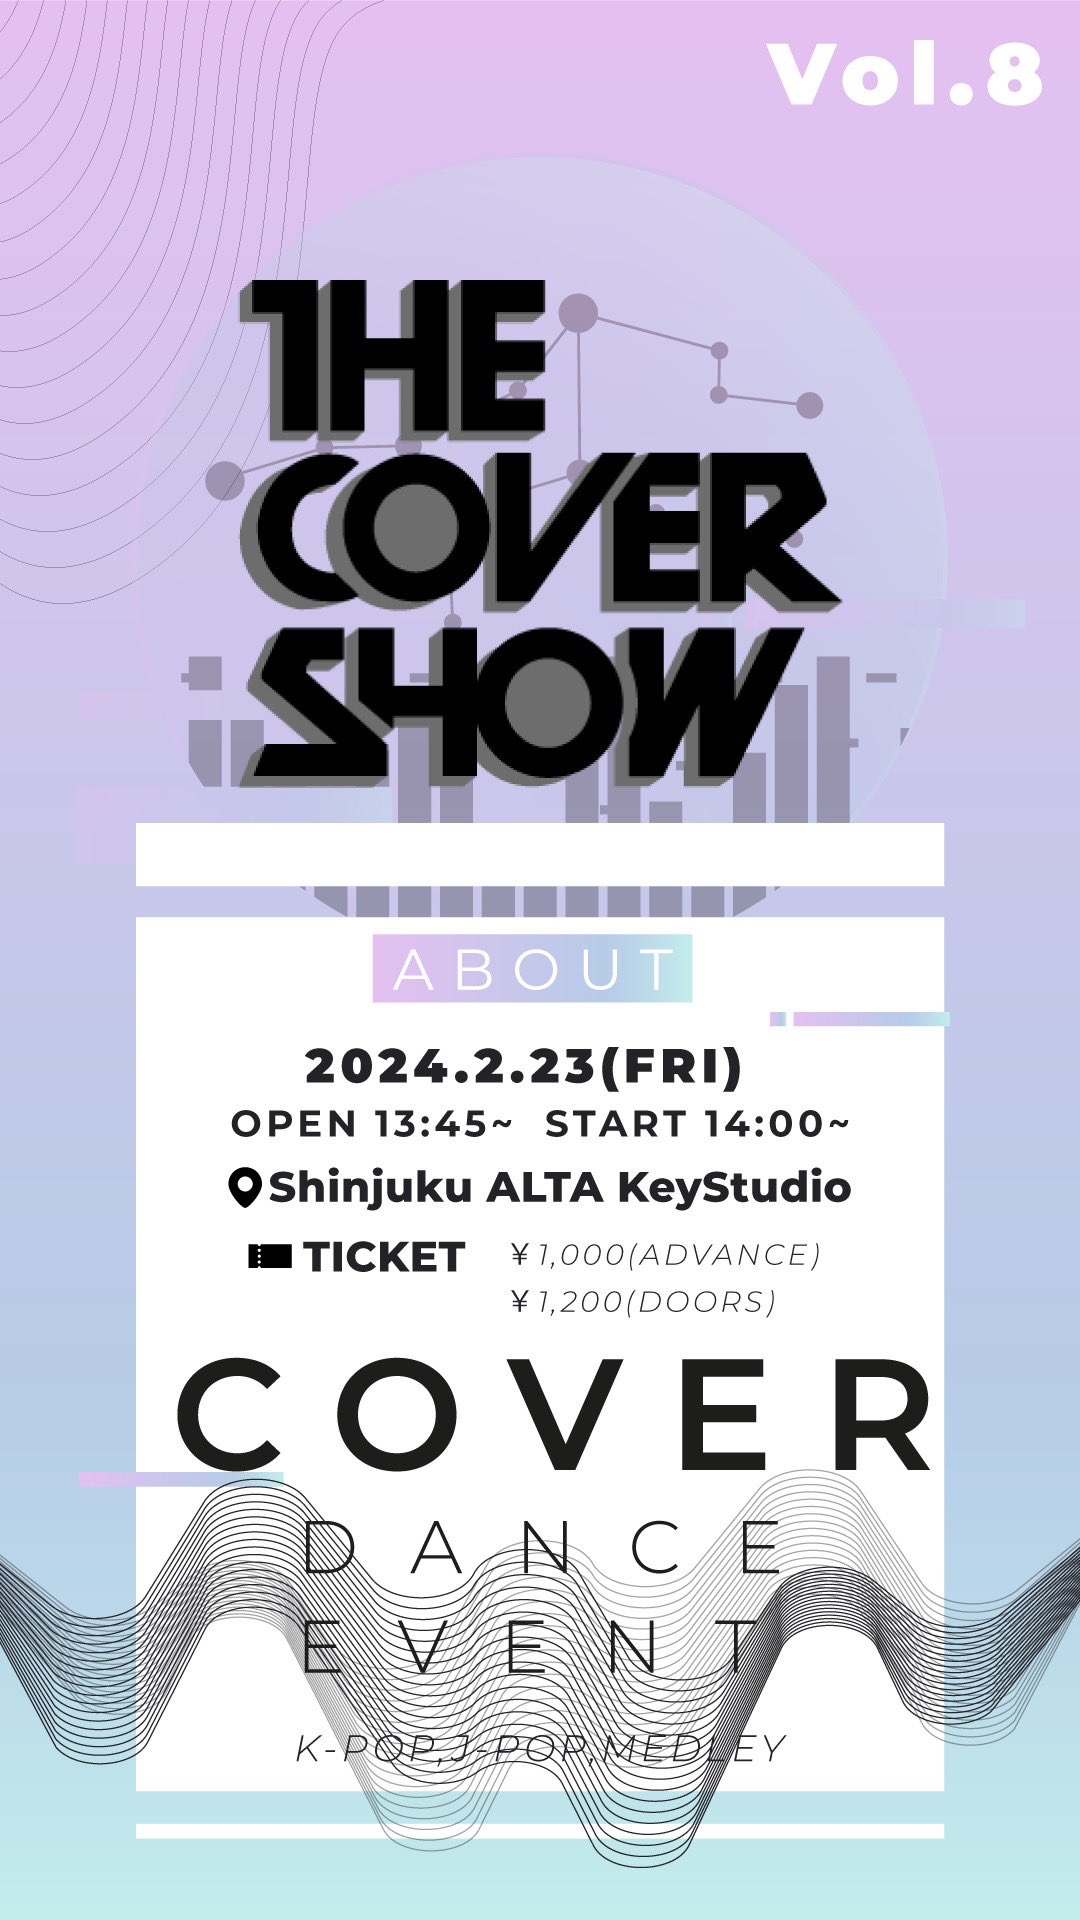 THE COVER SHOW vol.8